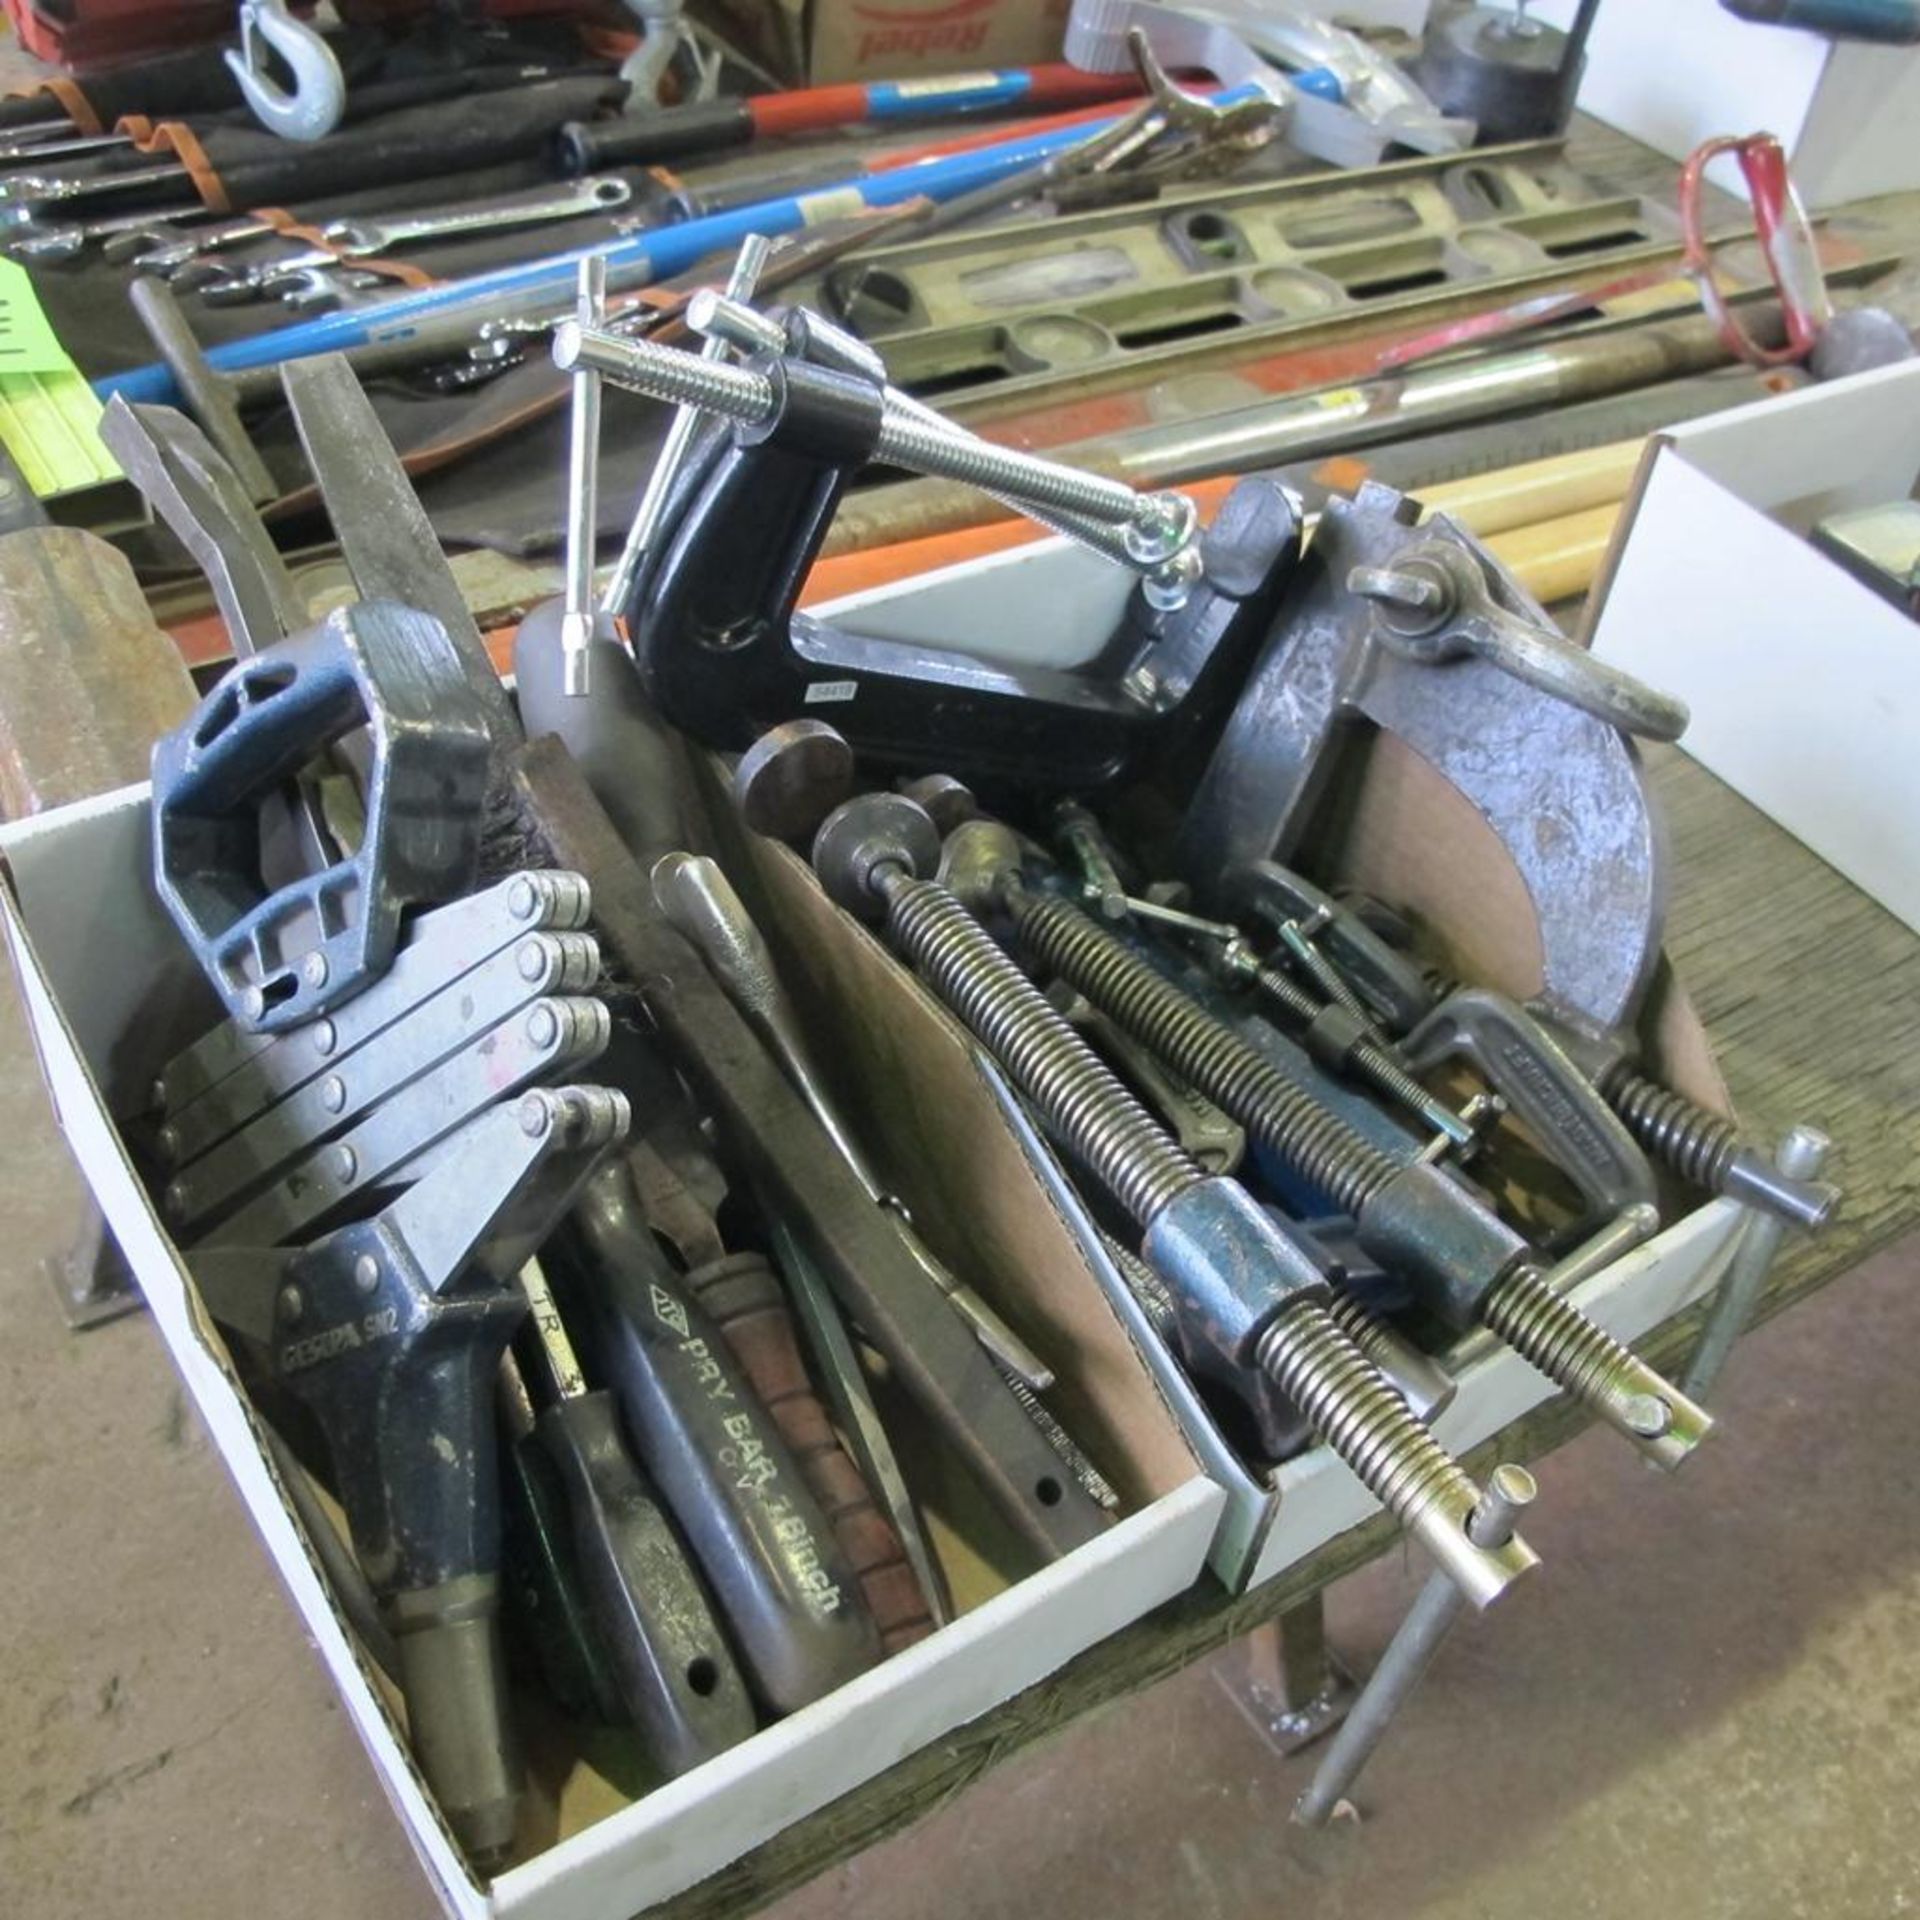 LOT OF HAND TOOLS (WRENCH SET, CRIMPER, CONDUIT BENCHES, LEVELS, VISE GRIP, SLEDGE HAMMERS, HOCK PUL - Image 2 of 2